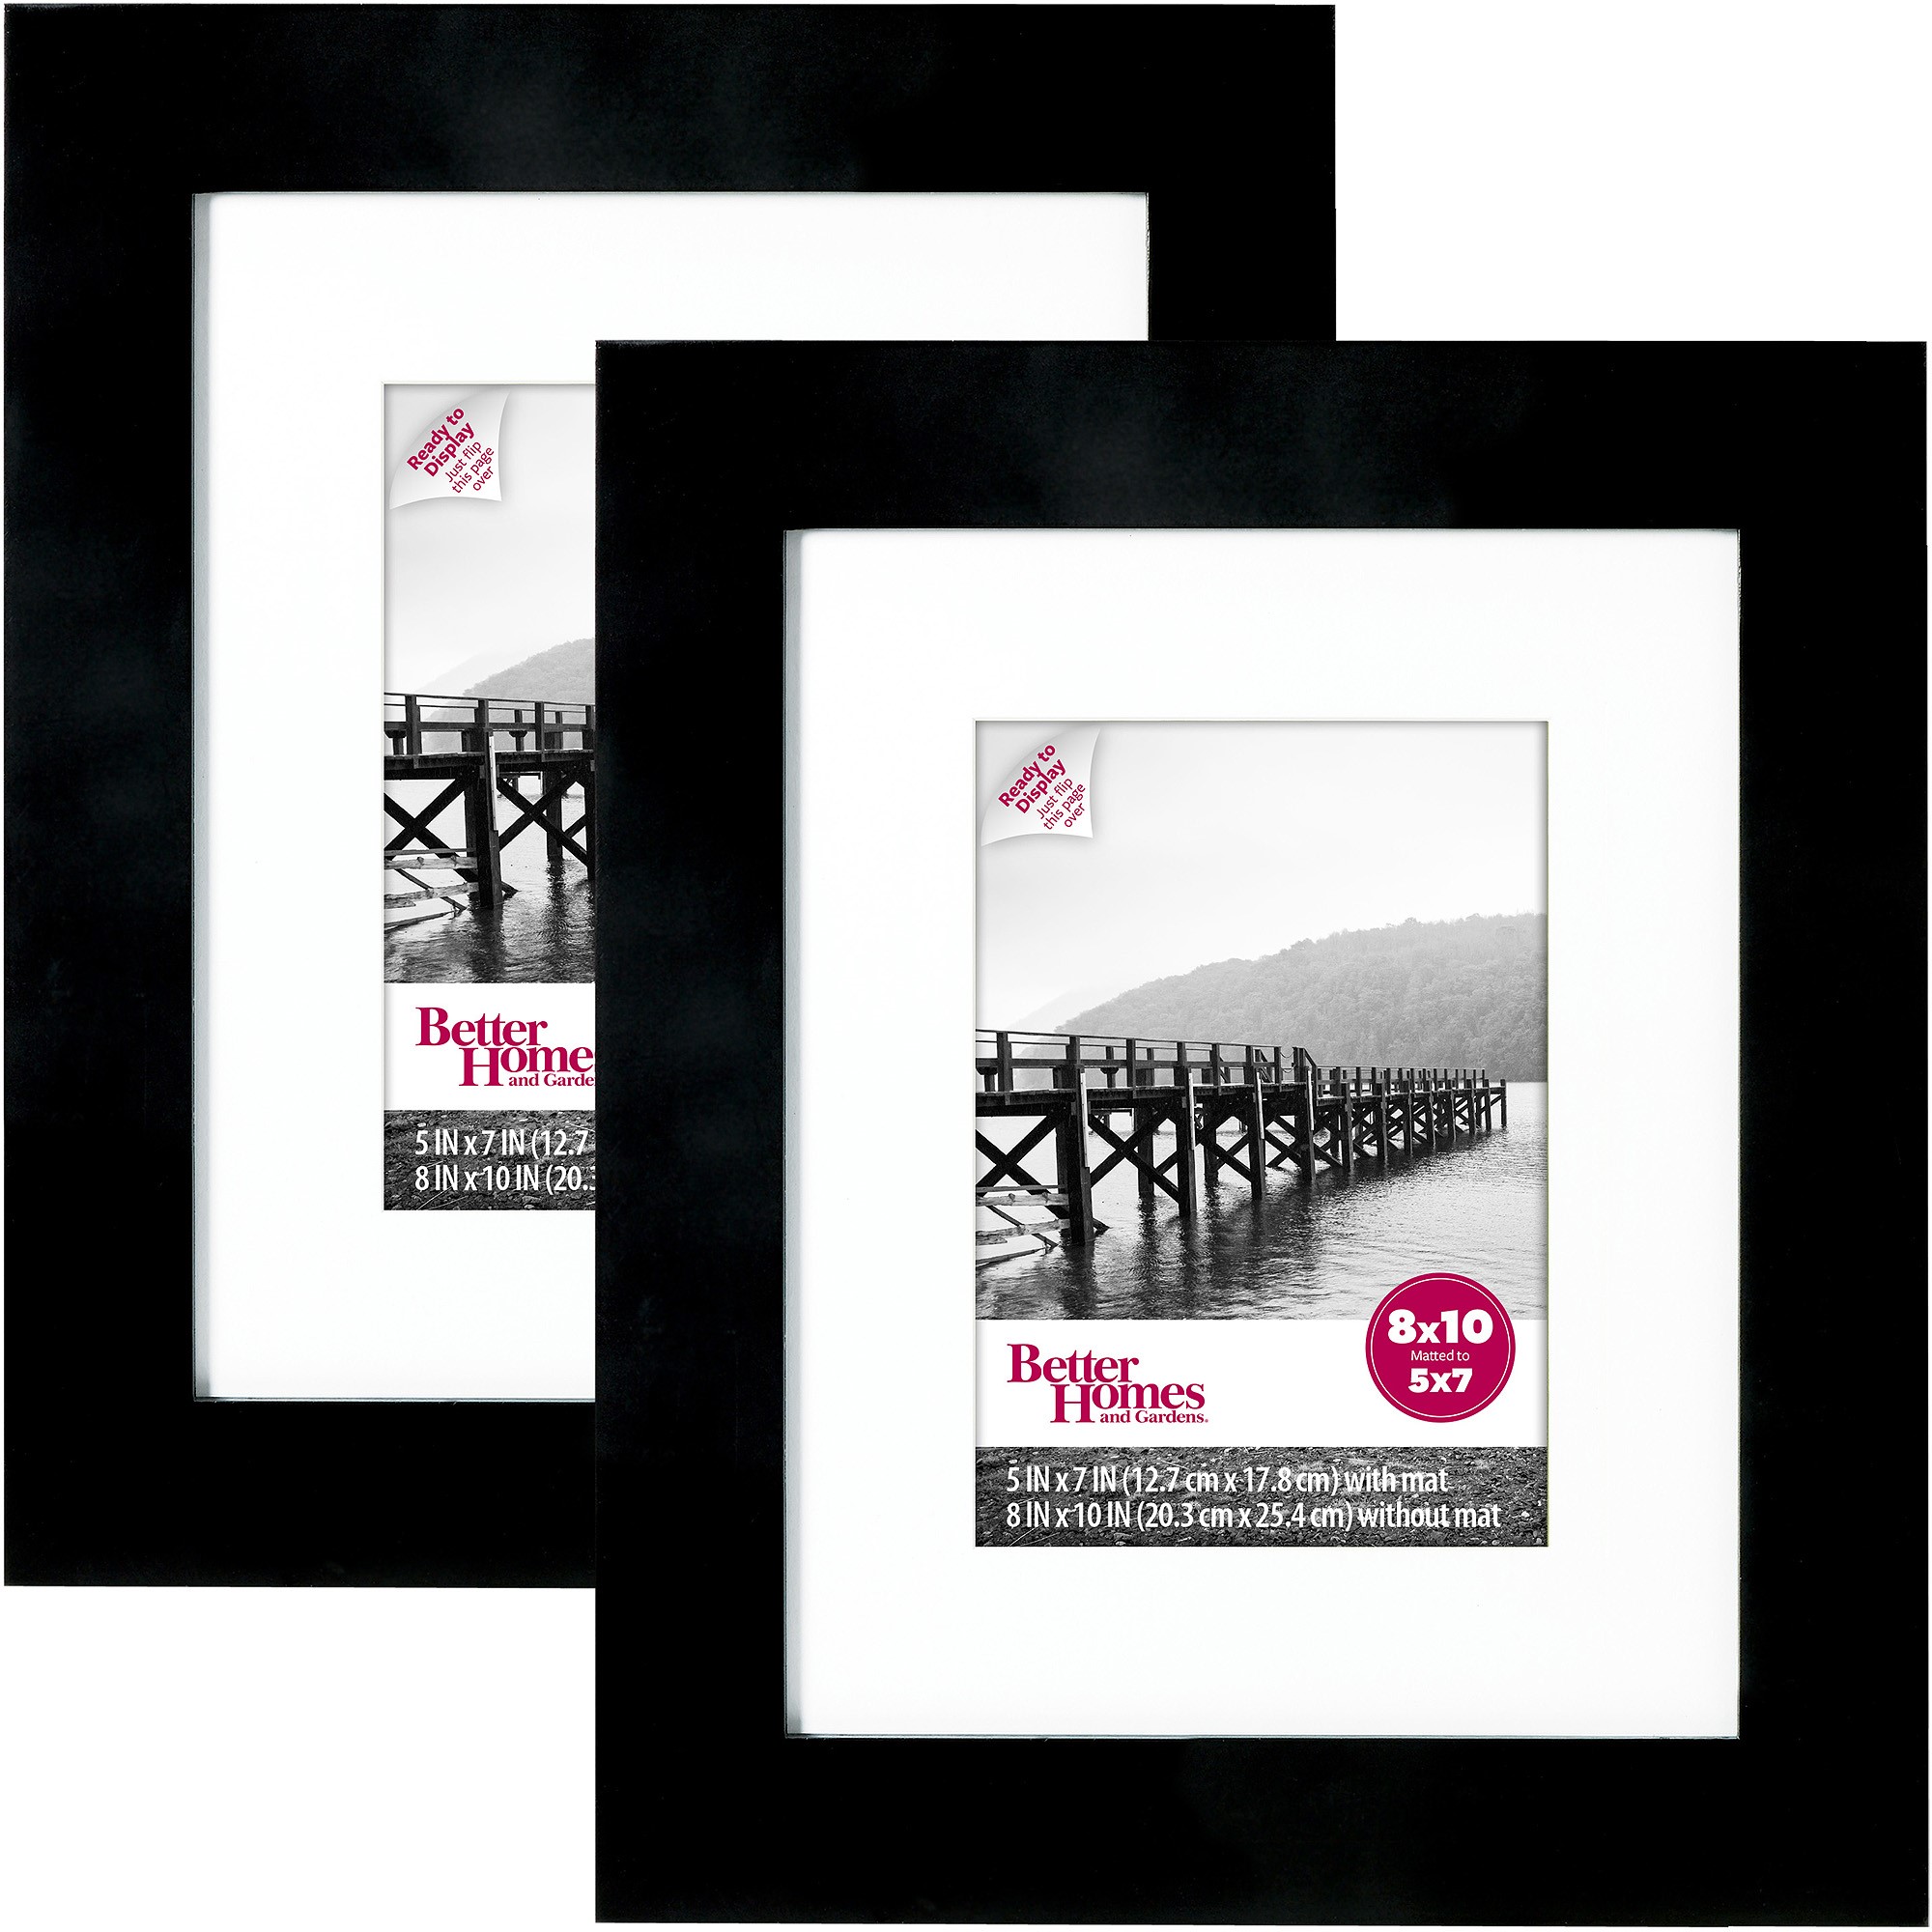 Better Homes & Gardens 8x10 Inch Wide Picture Frame, Black, Set of 2 - image 1 of 7